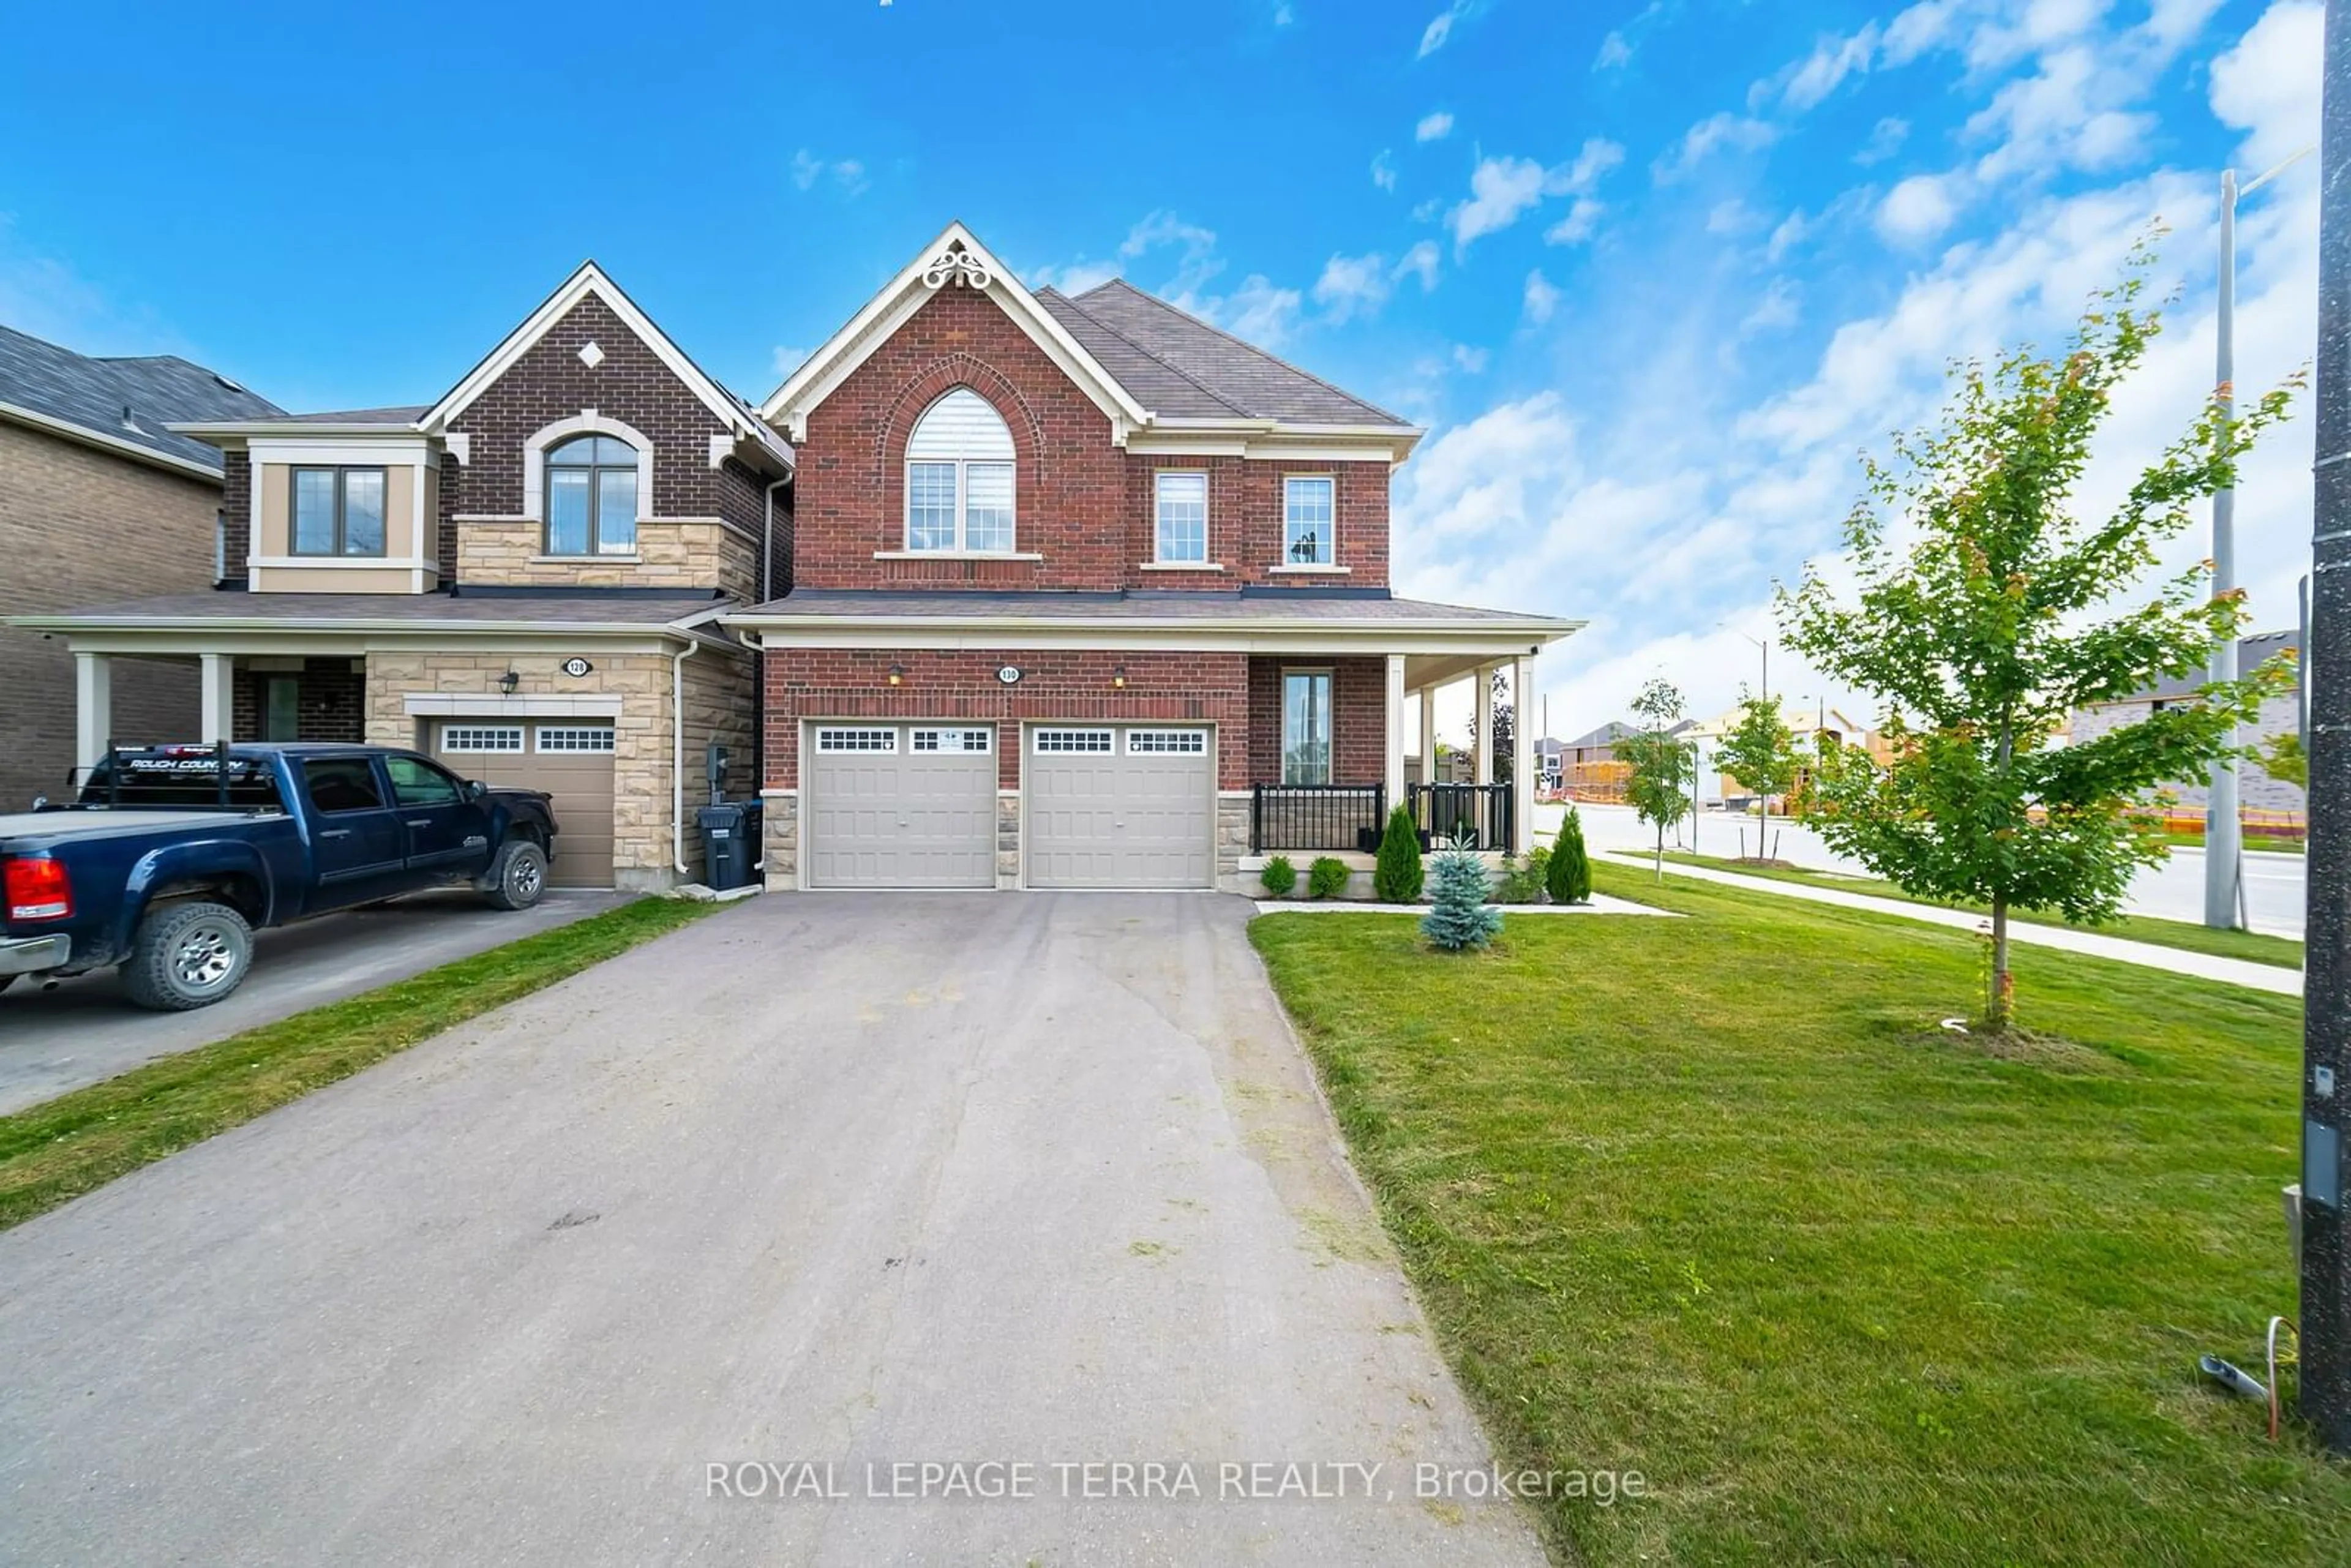 Home with brick exterior material for 130 Eberly Woods Dr, Caledon Ontario L7C 4J4